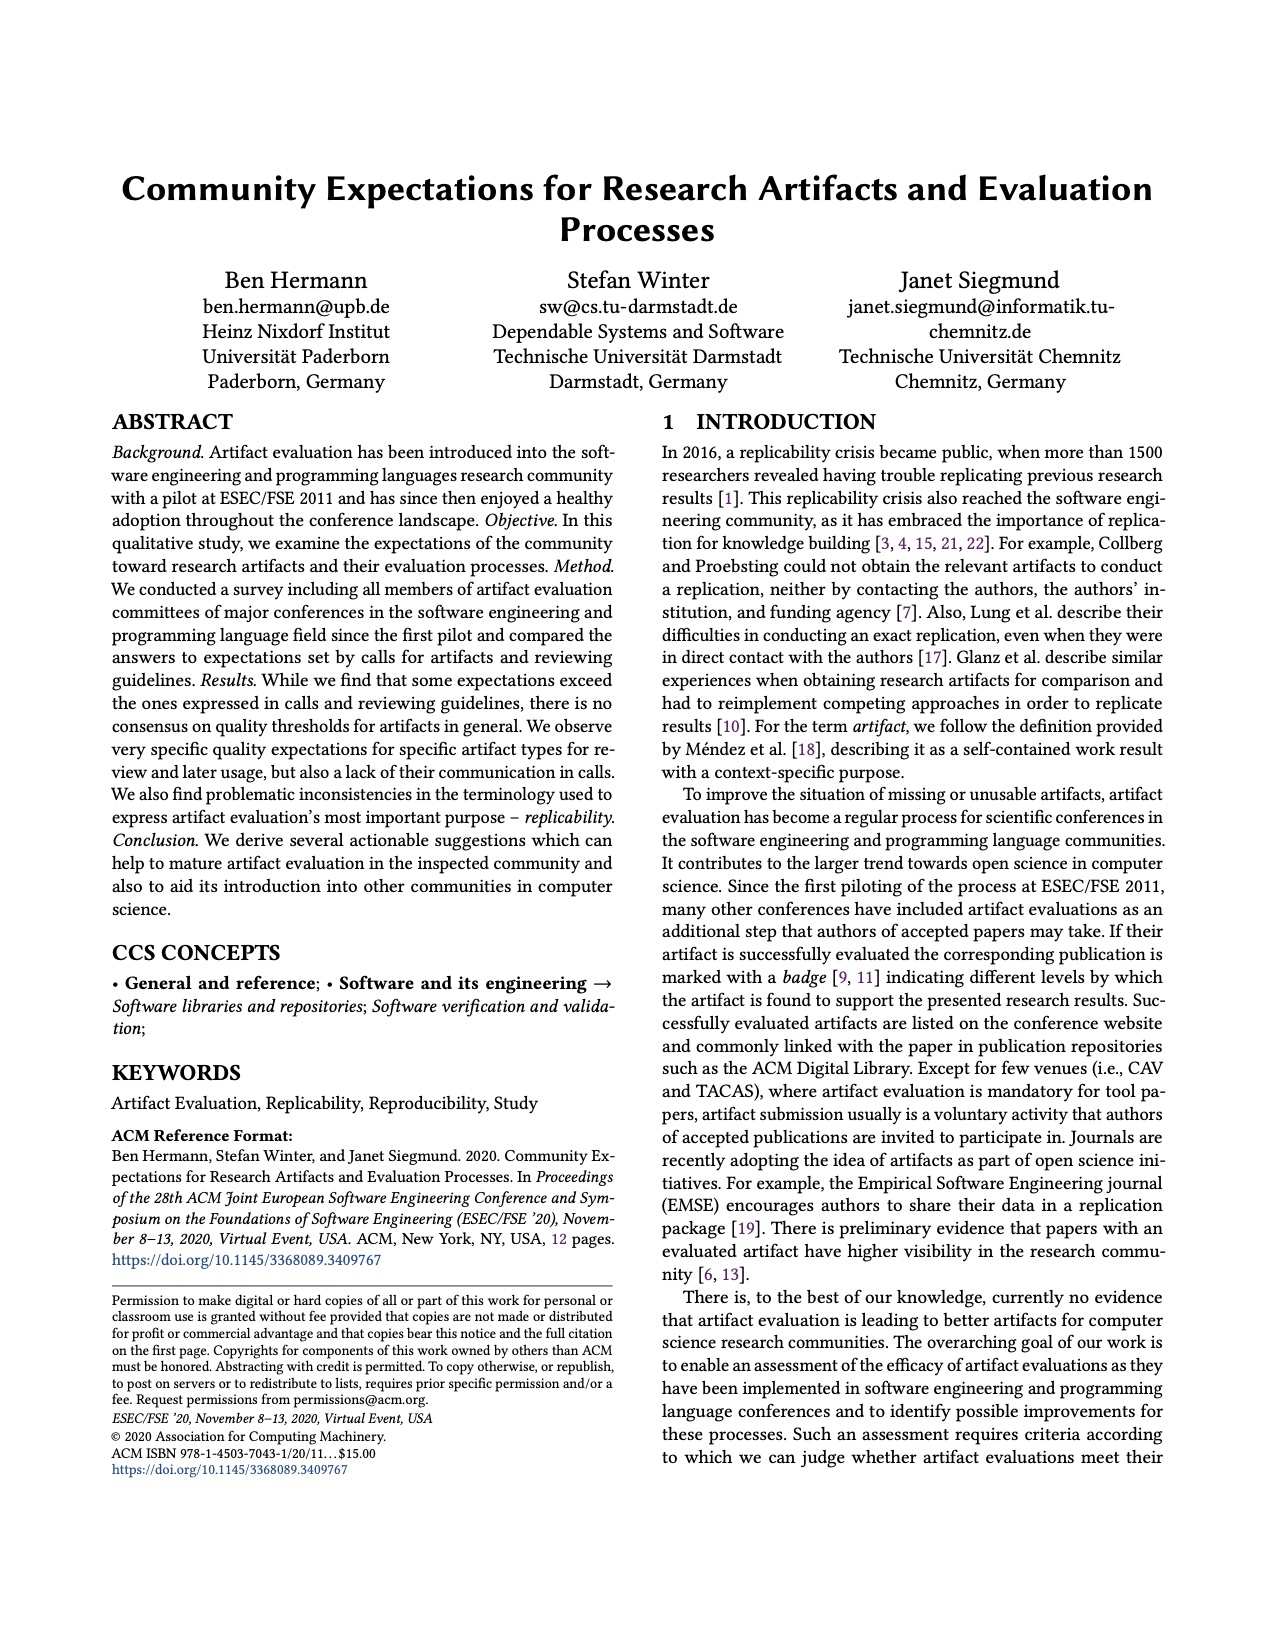 Community Expectations for Research Artifacts and Evaluation Processes (Paper Preprint)